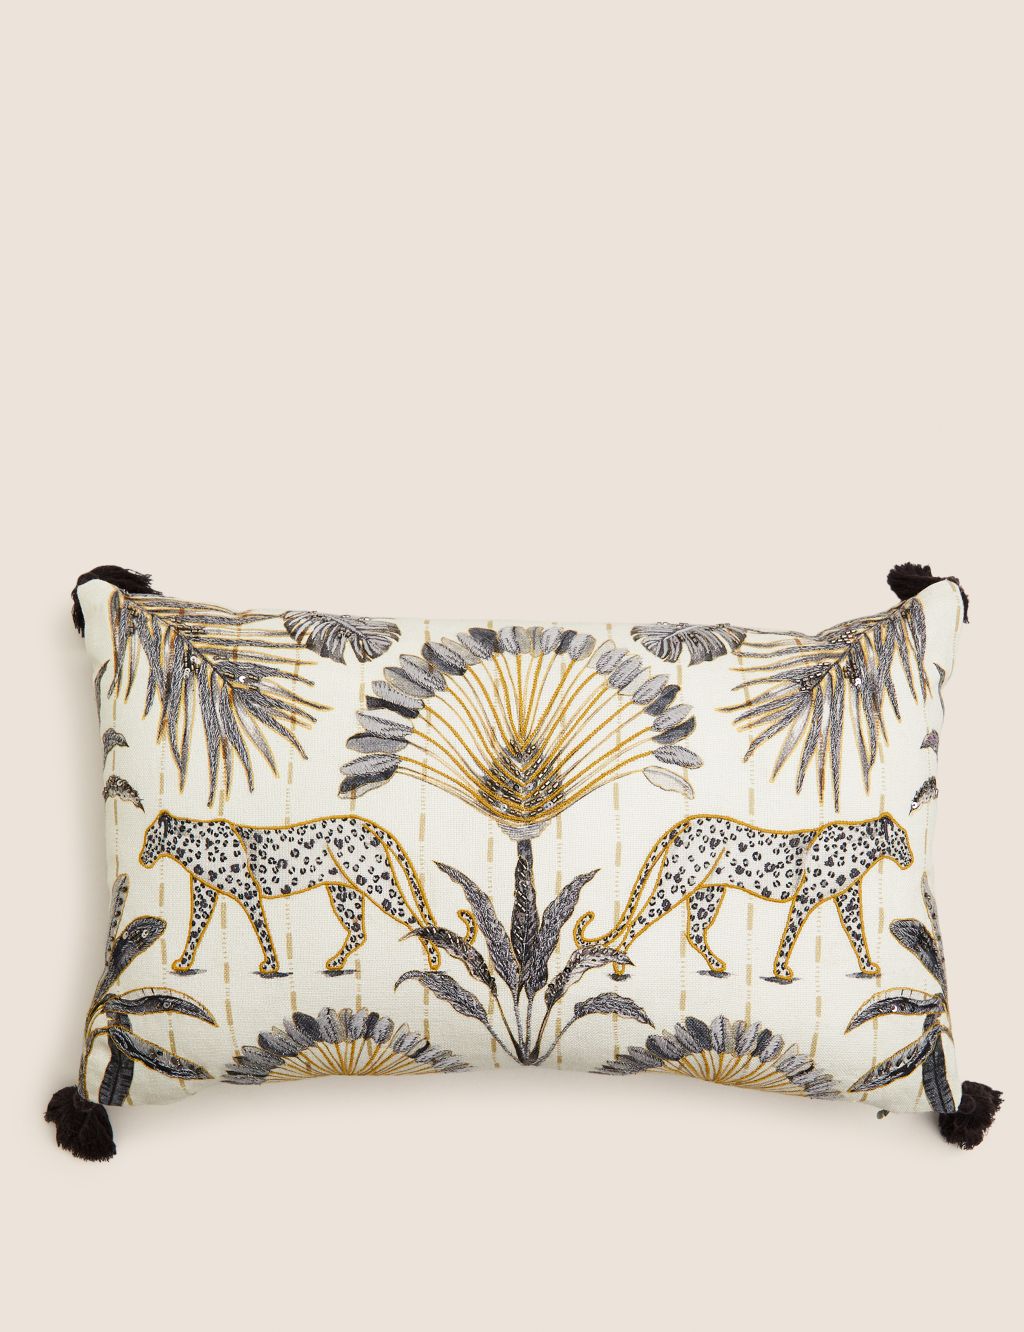 Cotton Blend Leopard Embroidered Bolster Cushion